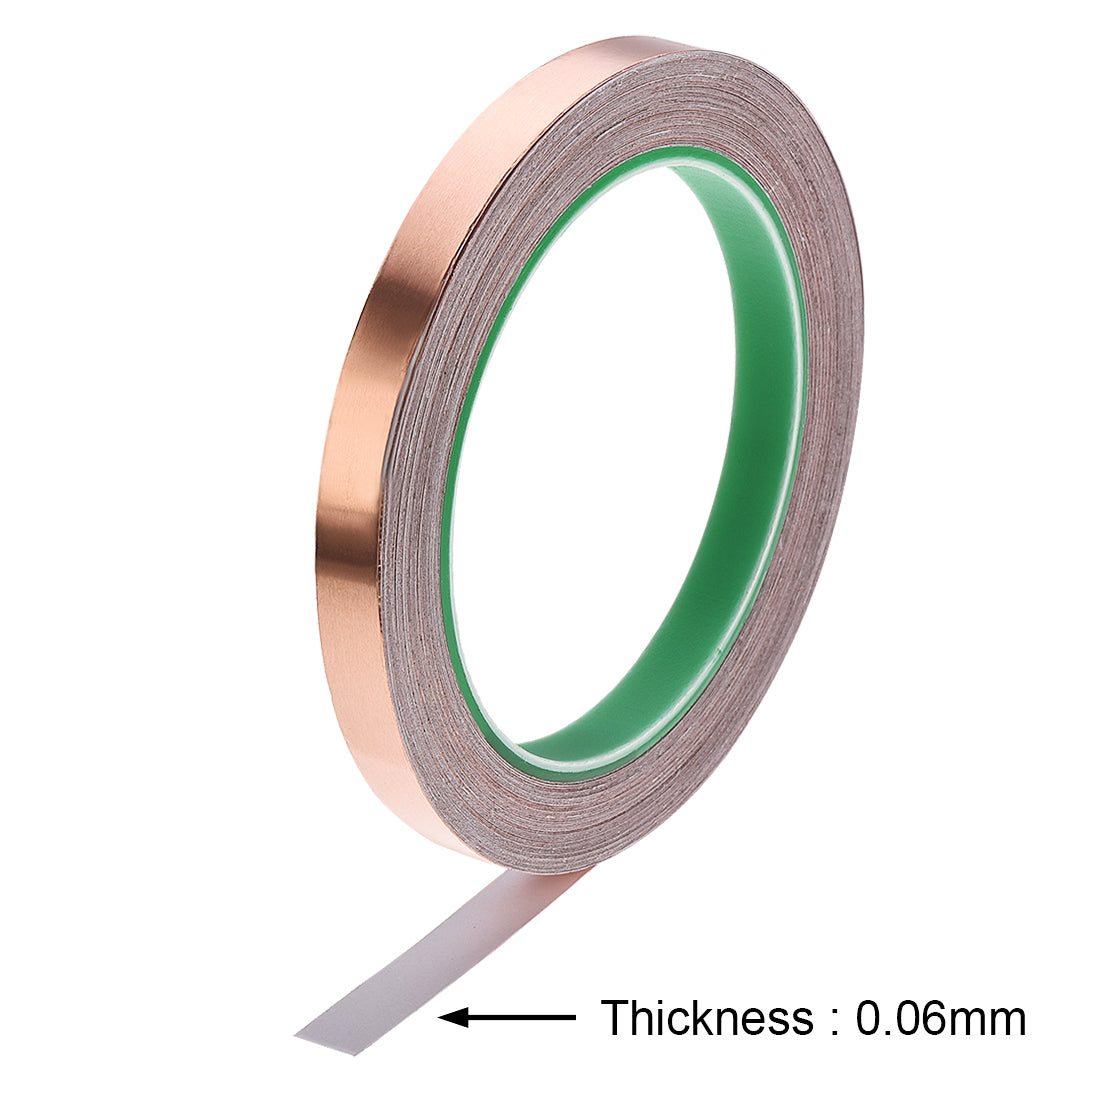 uxcell Uxcell Double Sided Conductive Tape Copper Foil Tape 10mm x 20m for EMI Shielding